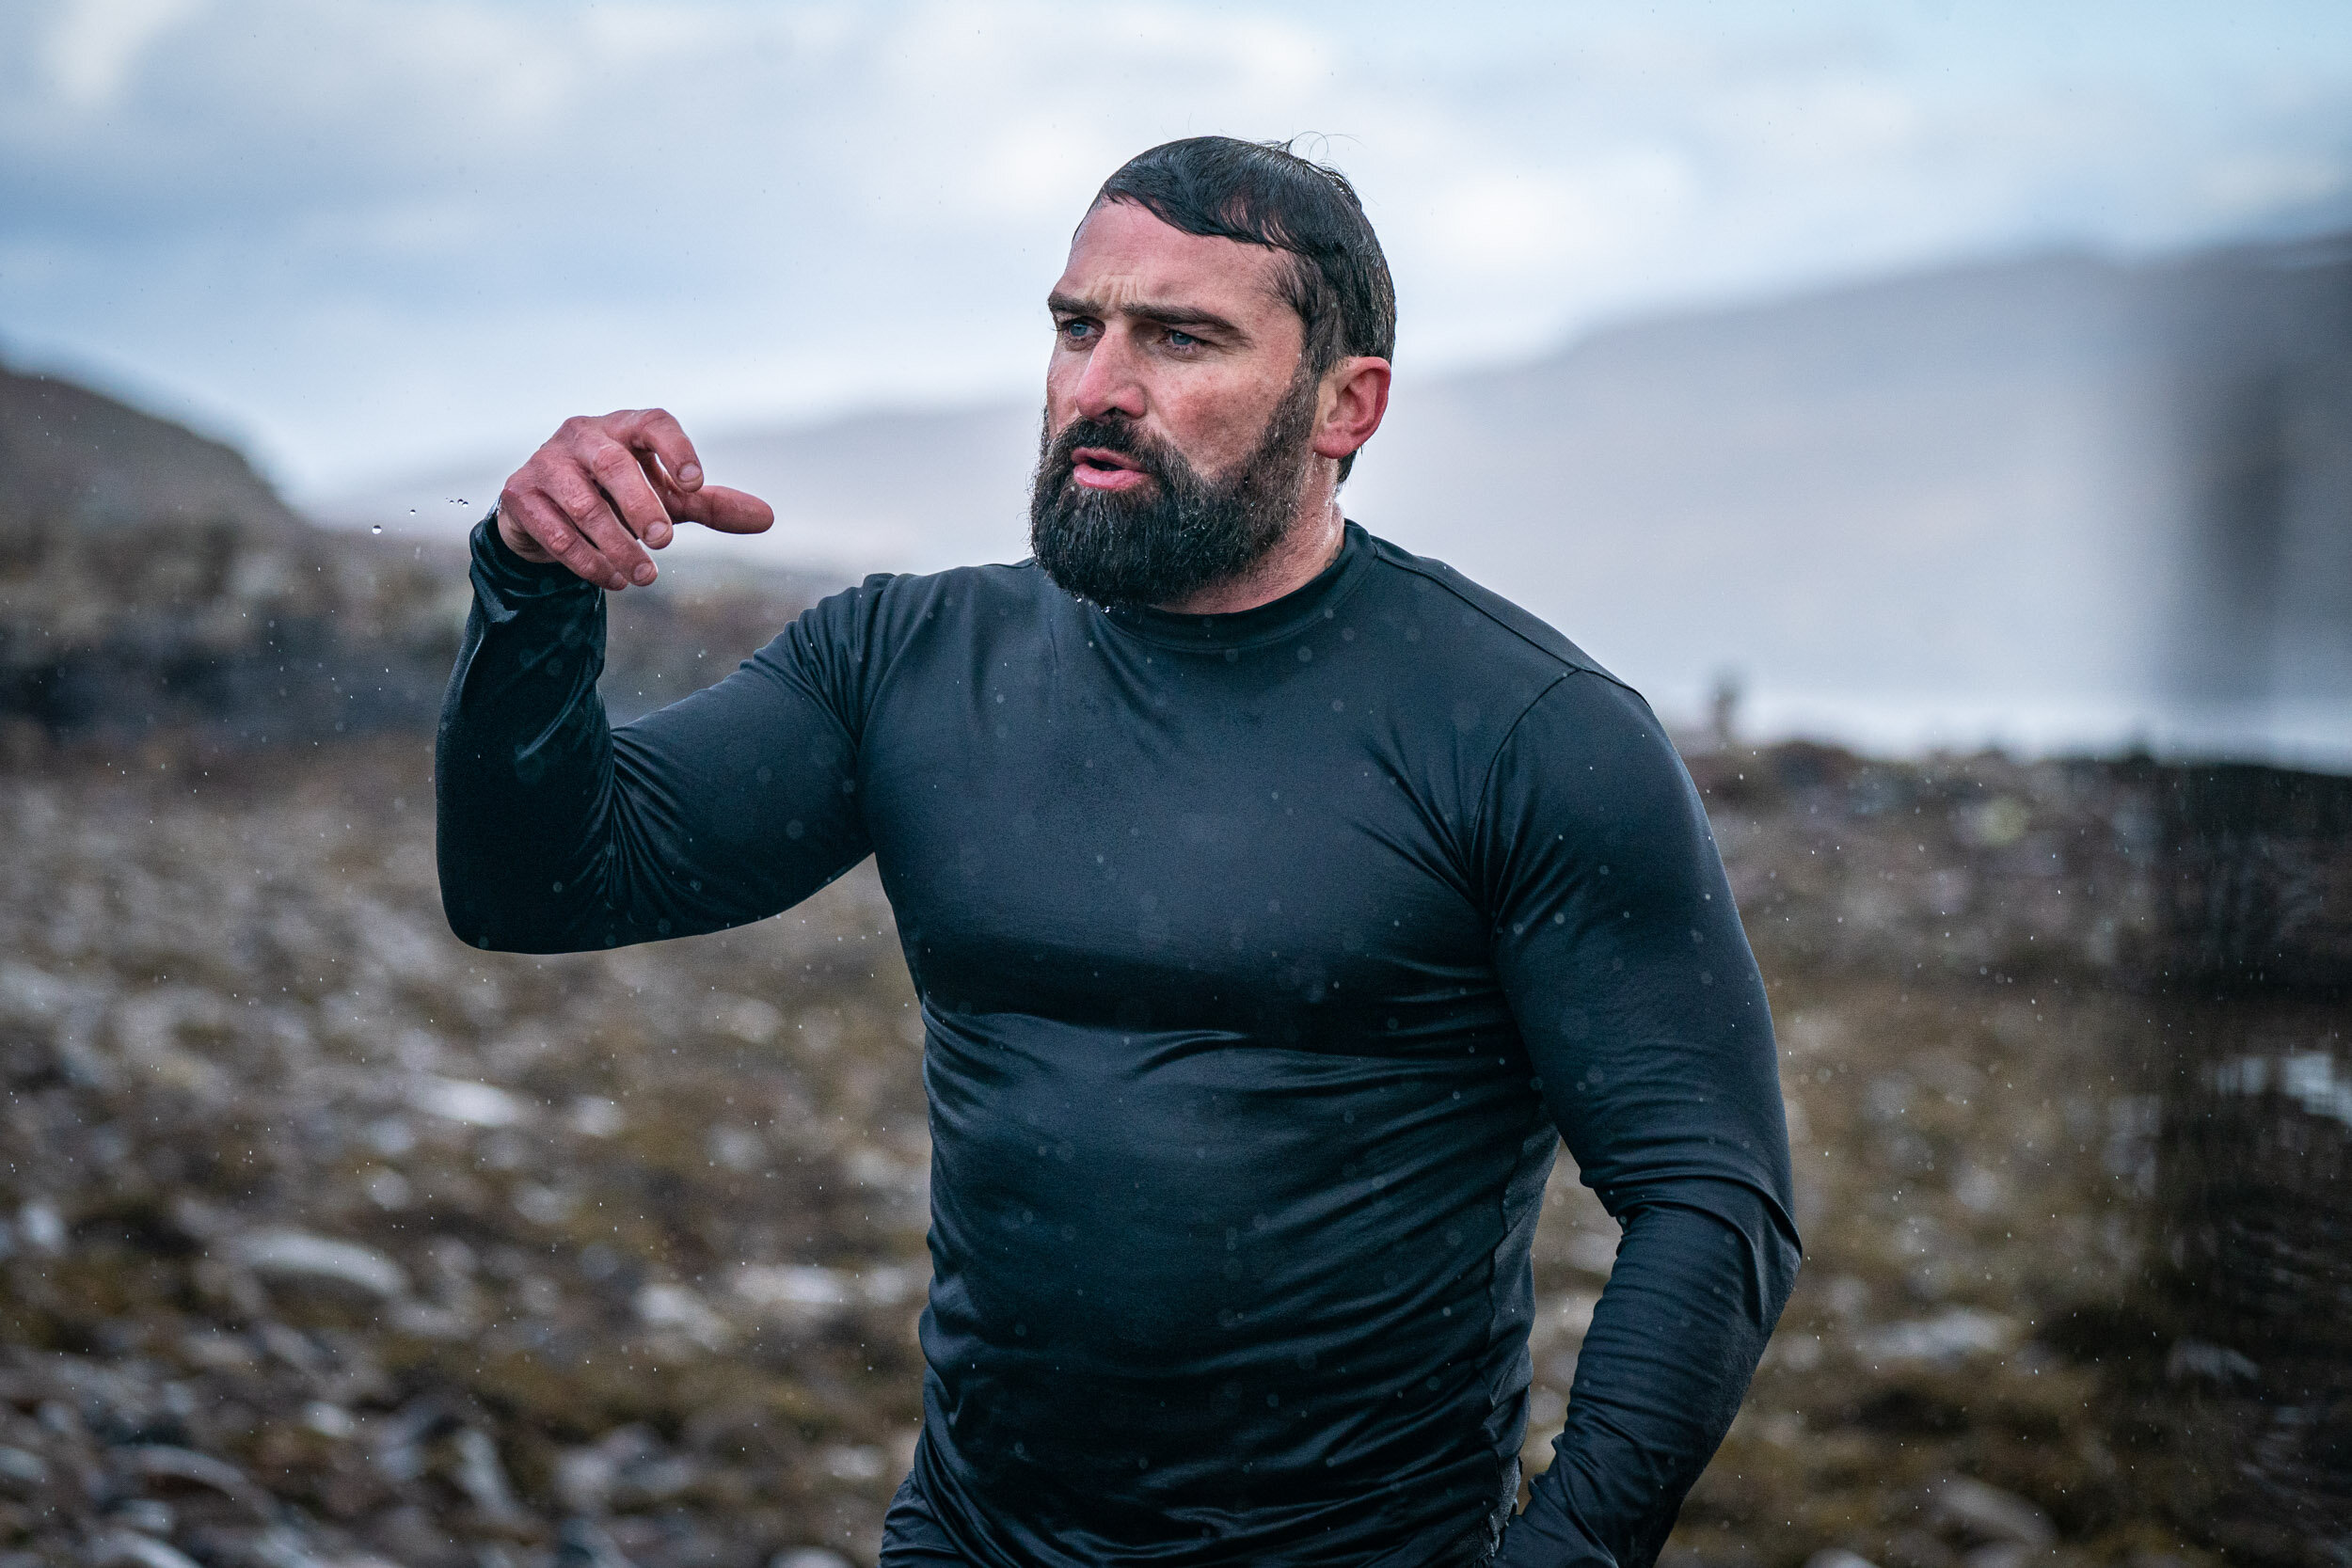  Chief Instructor Ant Middleton  Episode 2 - Backdive  Minnow Films / Channel 4 